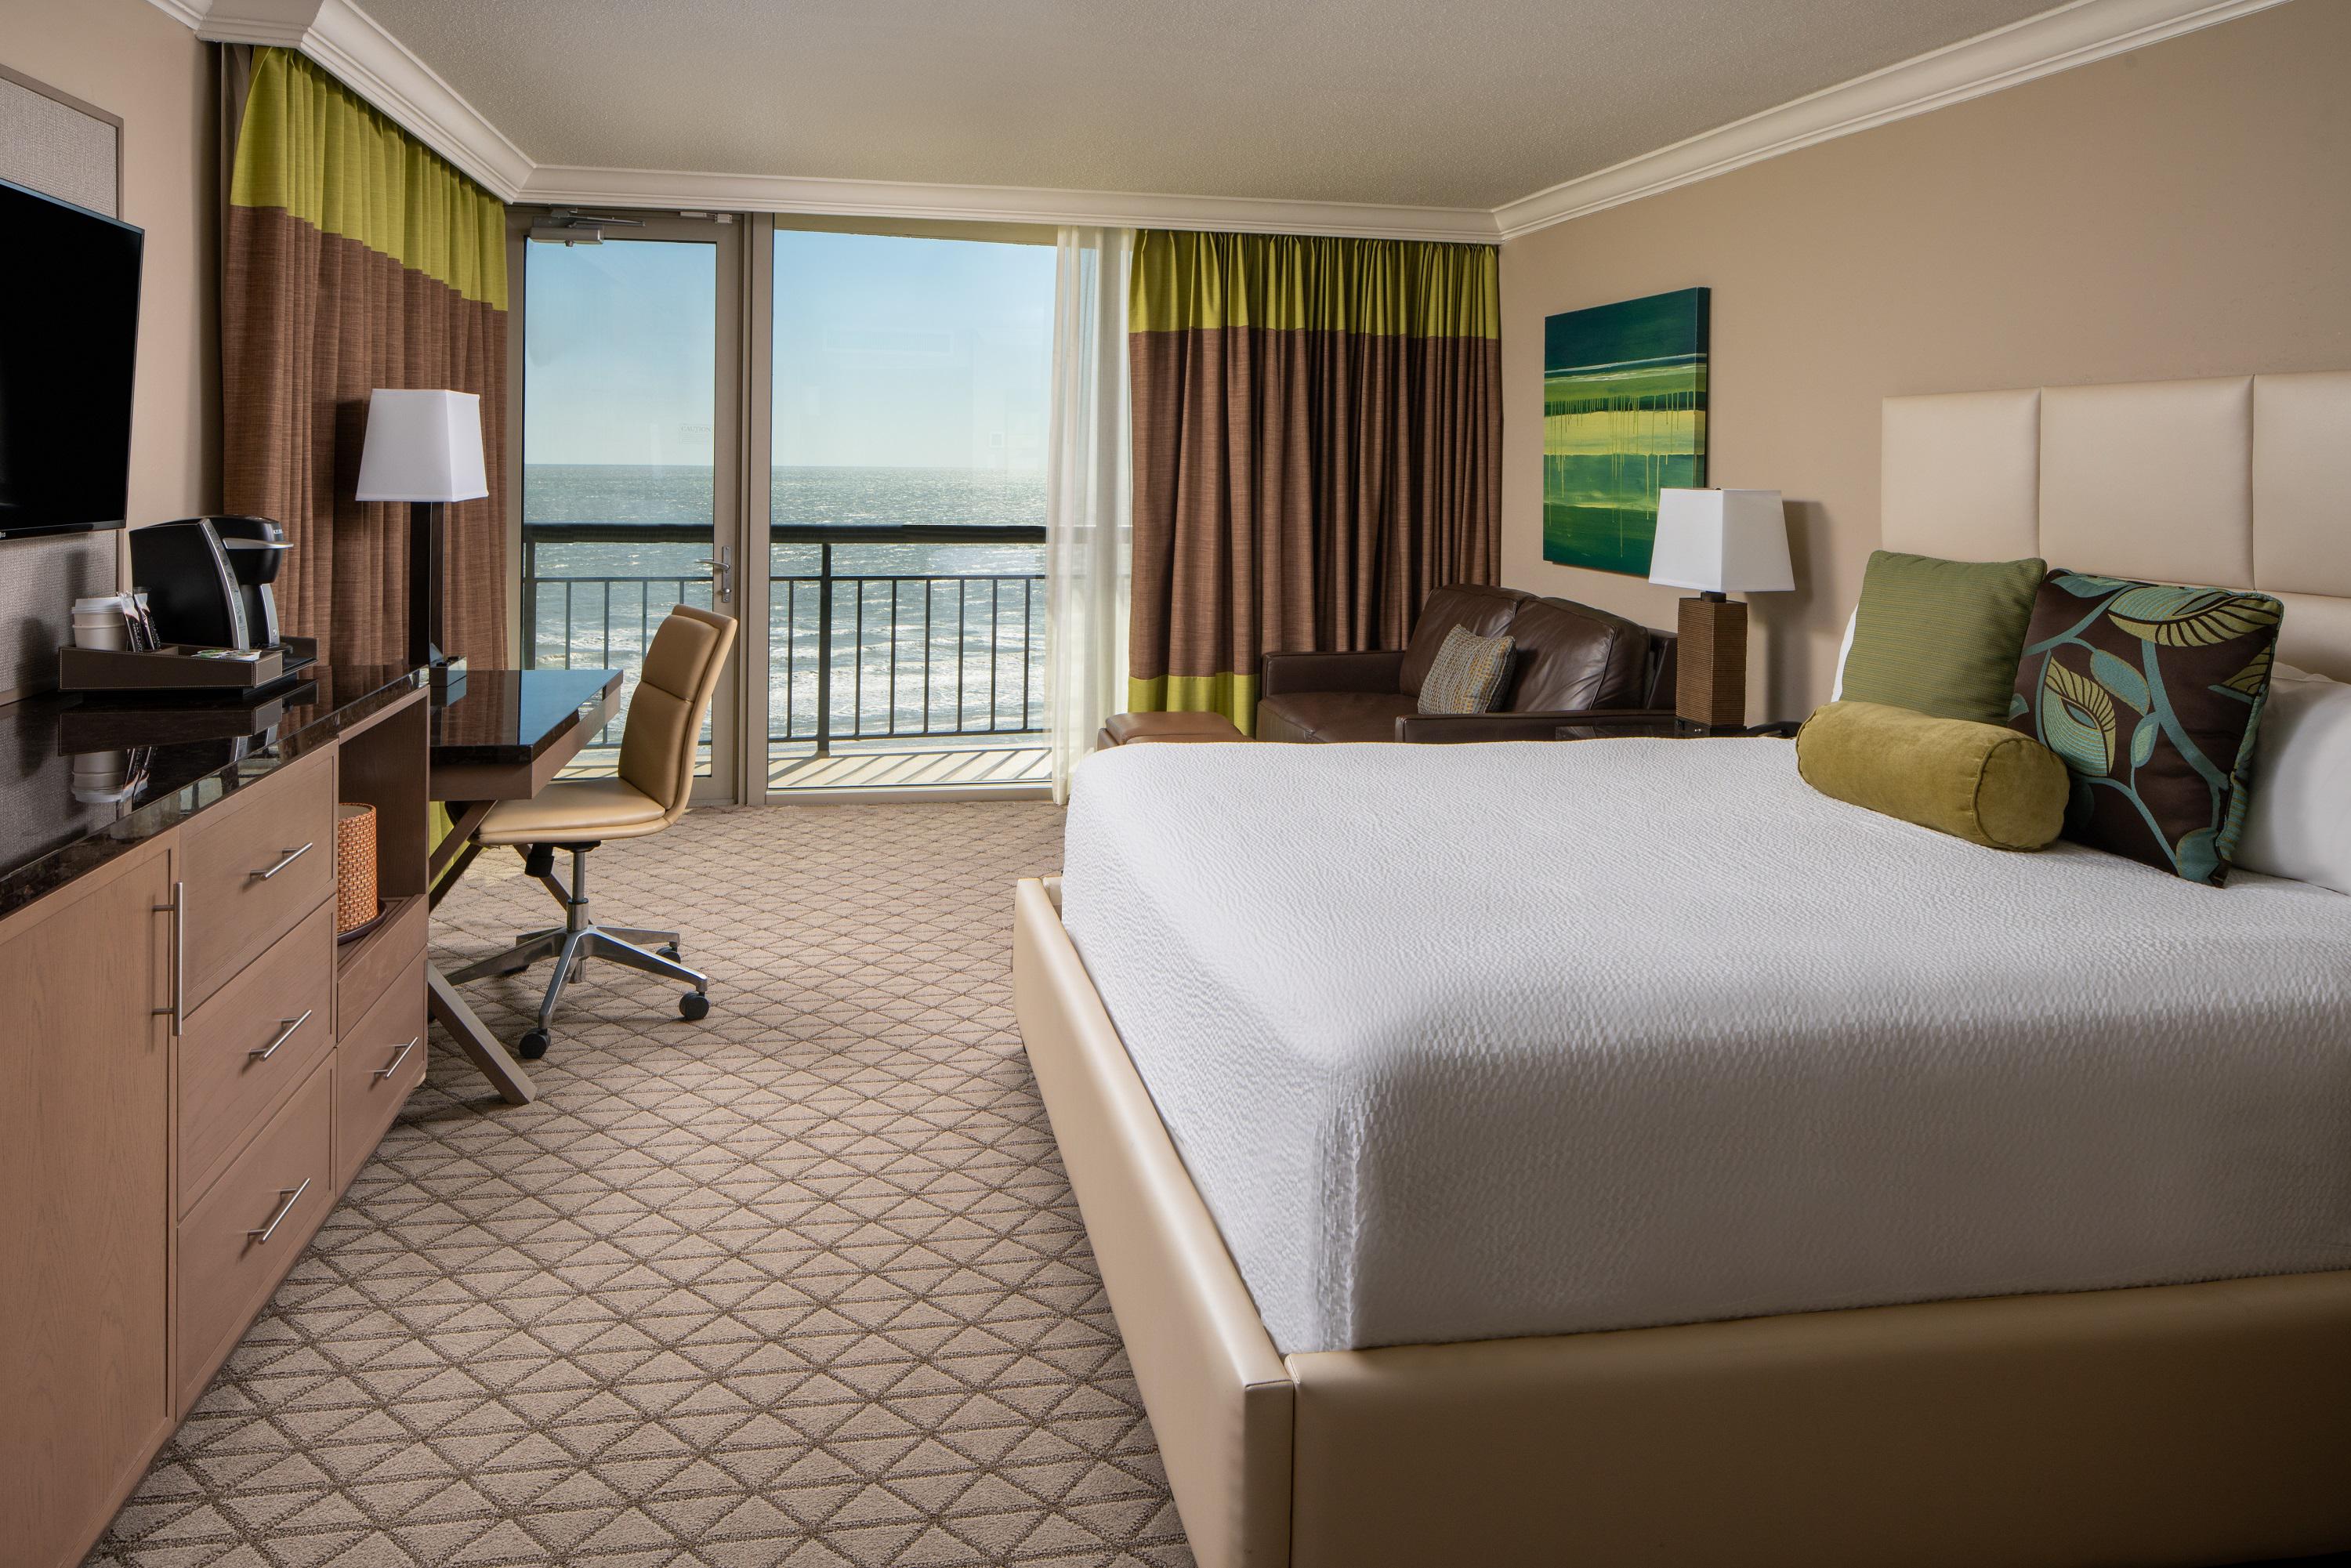 Ocean View Corner Suite The San Luis Resort, Spa and Conference Center Galveston (409)744-1500